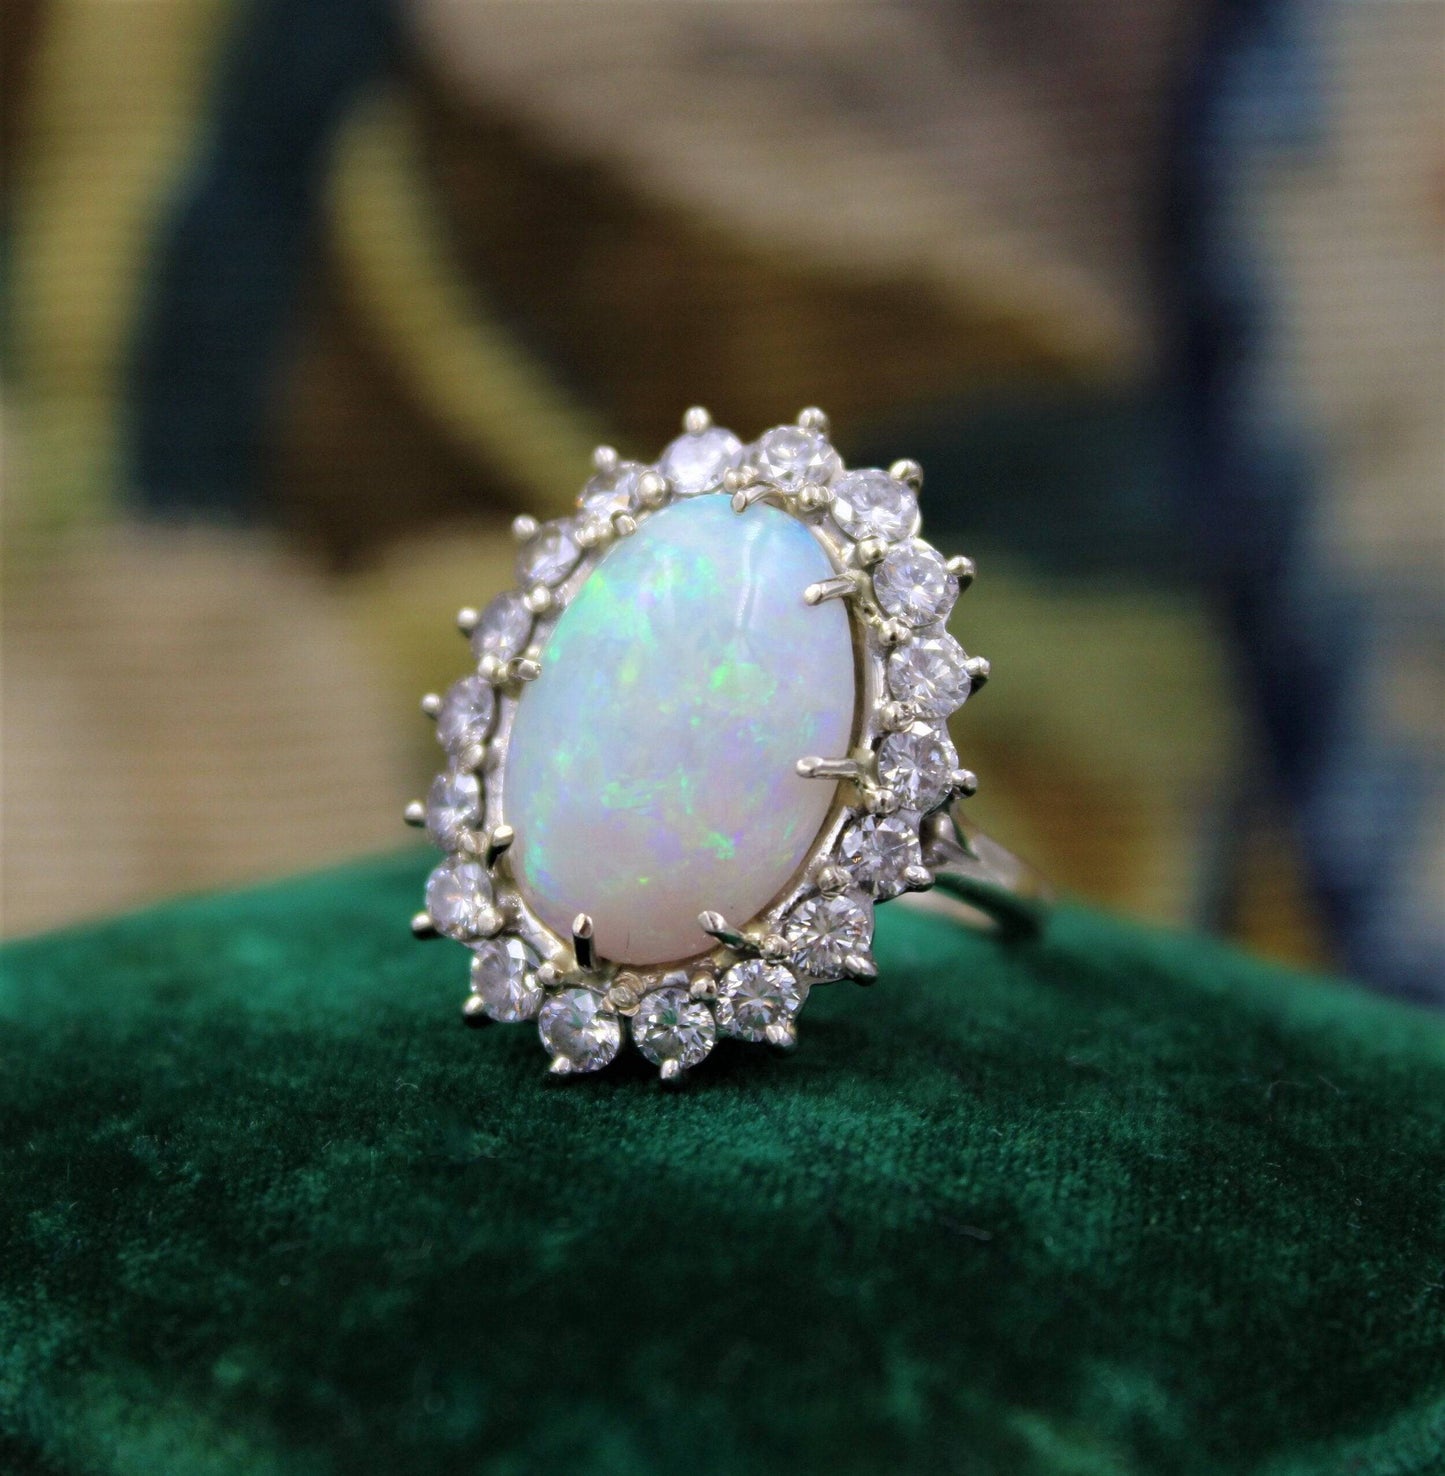 A very fine Opal and Diamond Cluster Ring set in 18ct White Gold, English, Circa 1960 - Robin Haydock Antiques